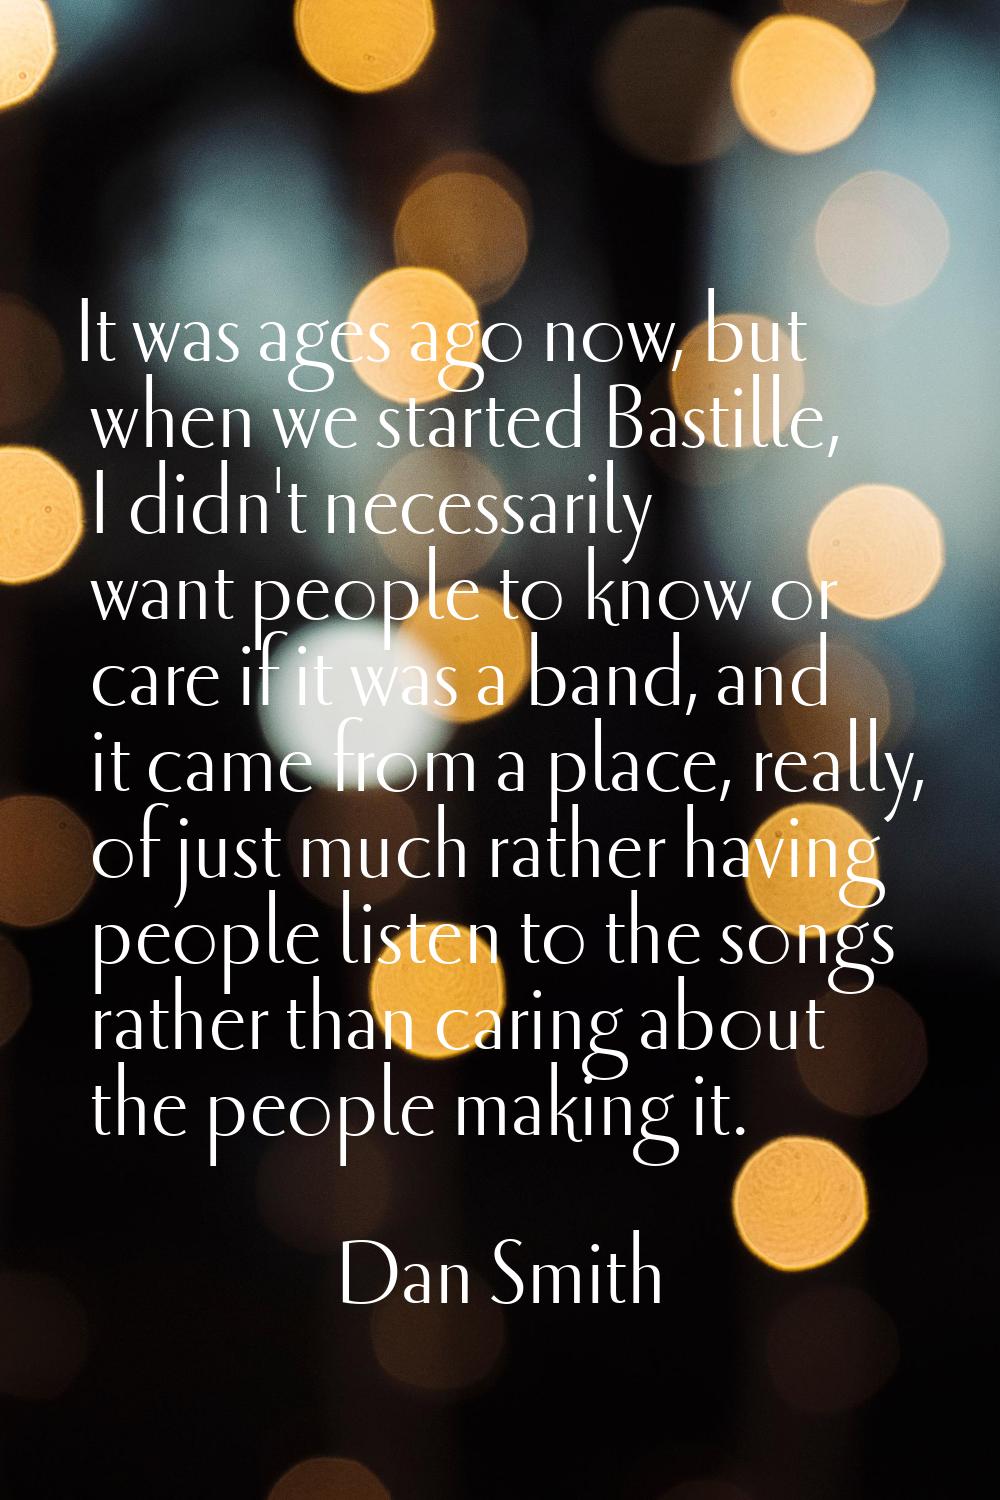 It was ages ago now, but when we started Bastille, I didn't necessarily want people to know or care